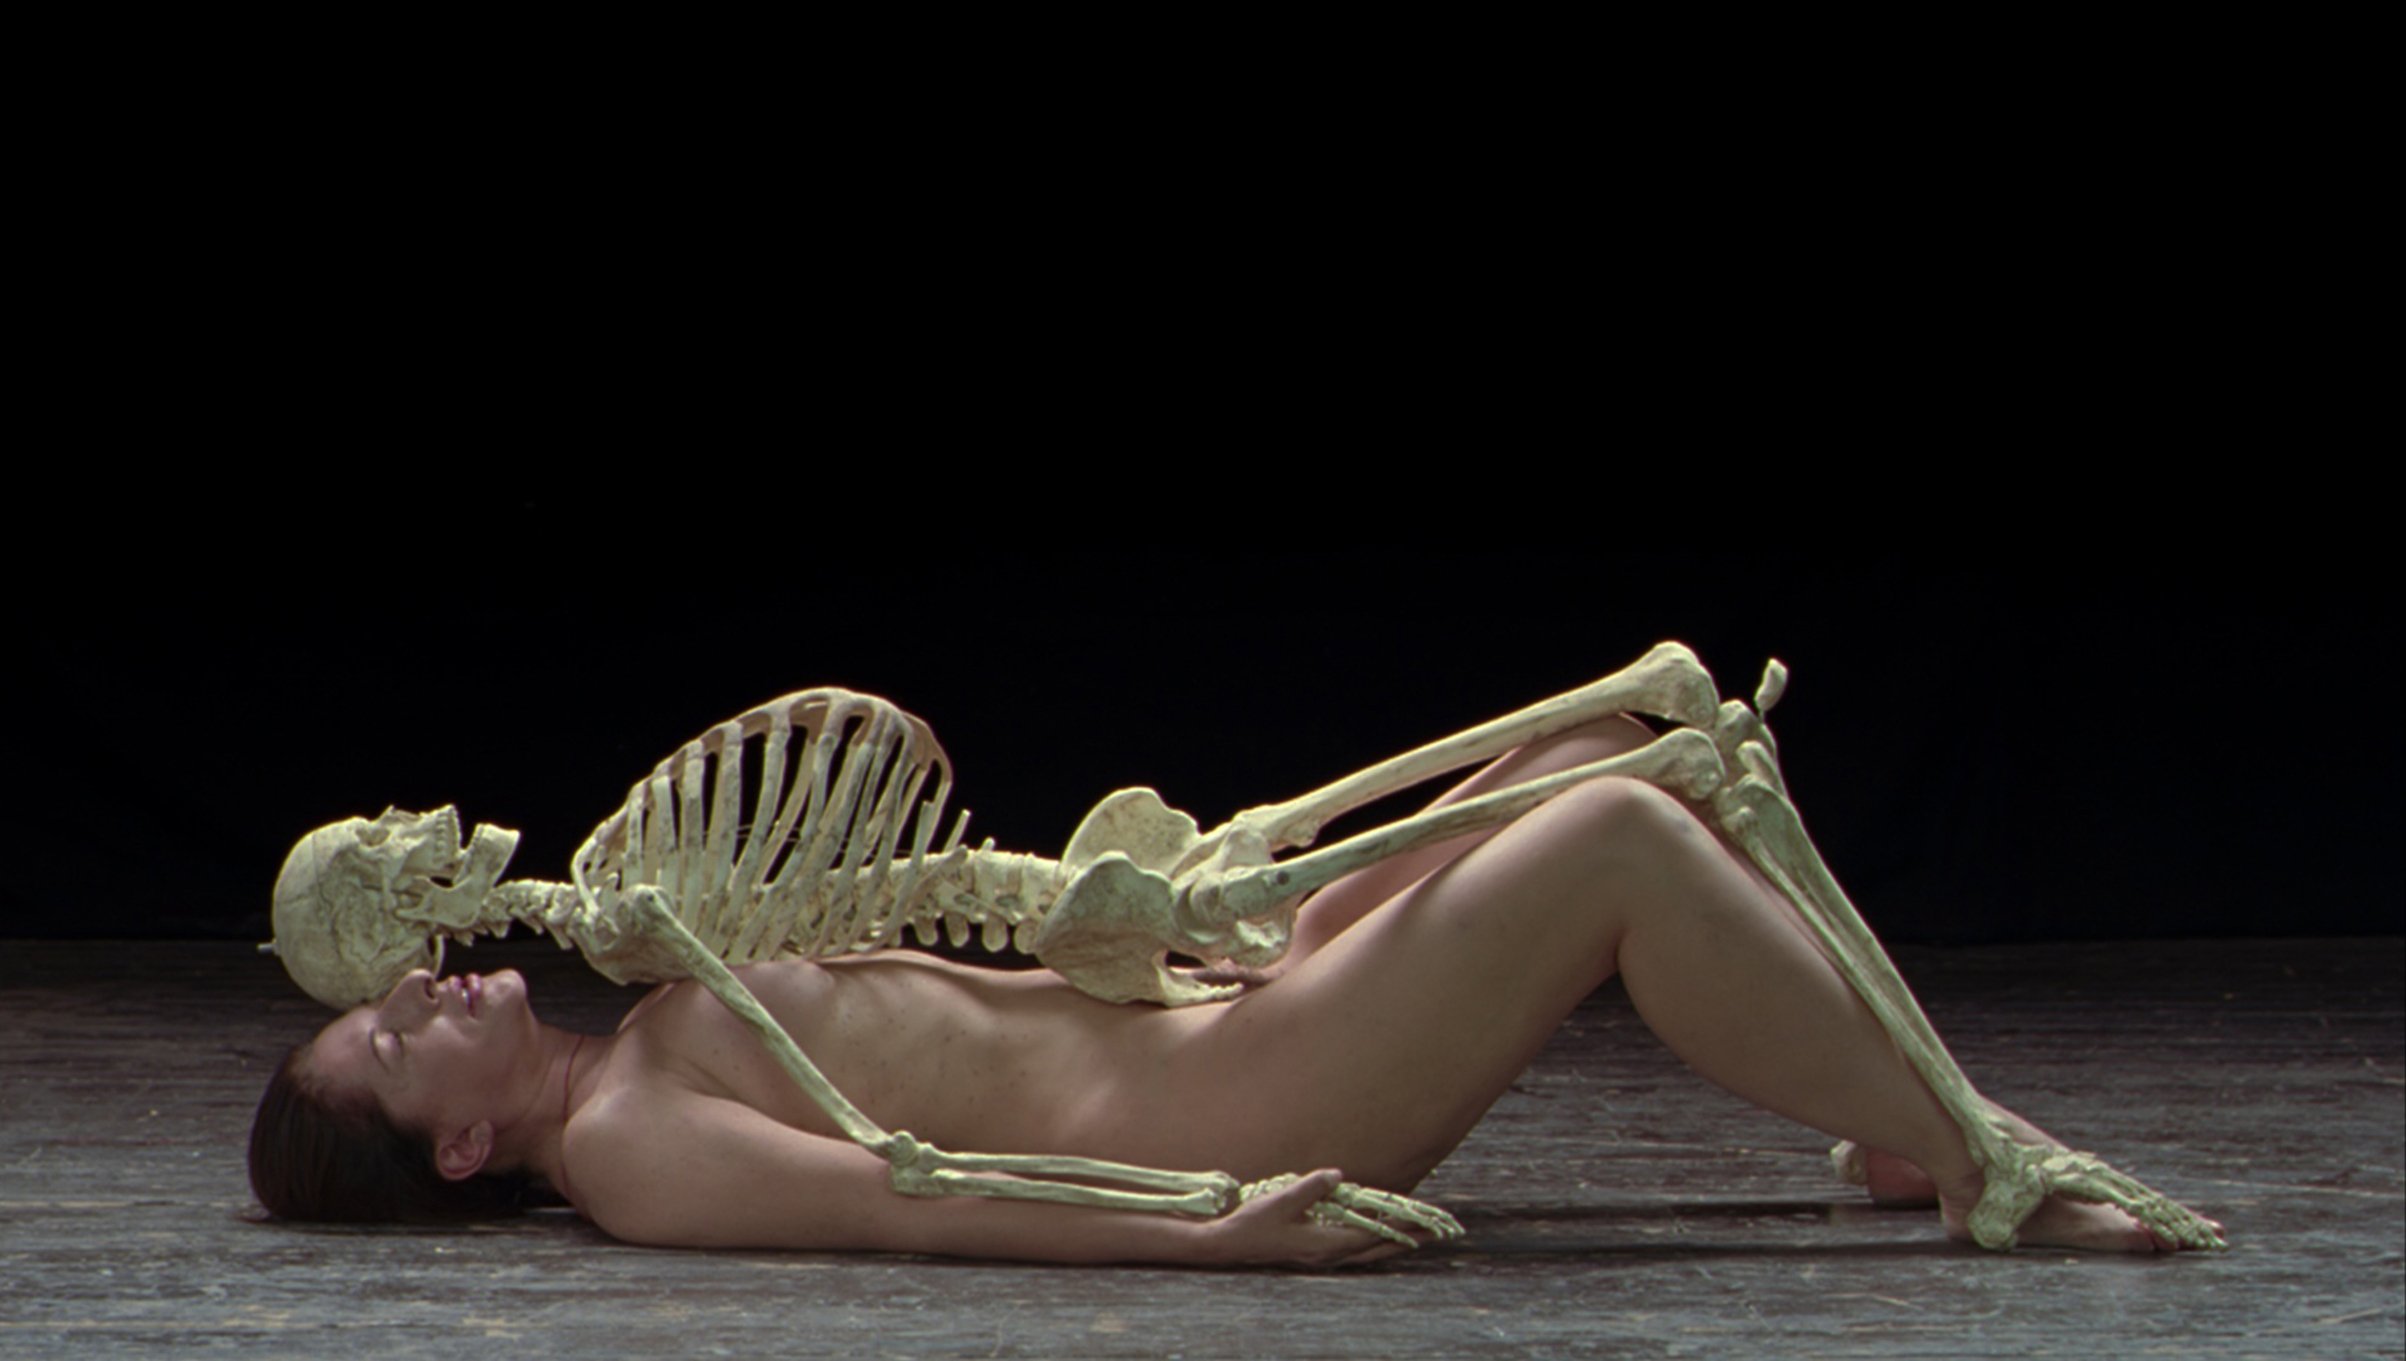  Marina Abramović,   Nude with Skeleton, 2005.   Performance for Video; 15 minutes 46 seconds. Courtesy of the Marina Abramović Archives 